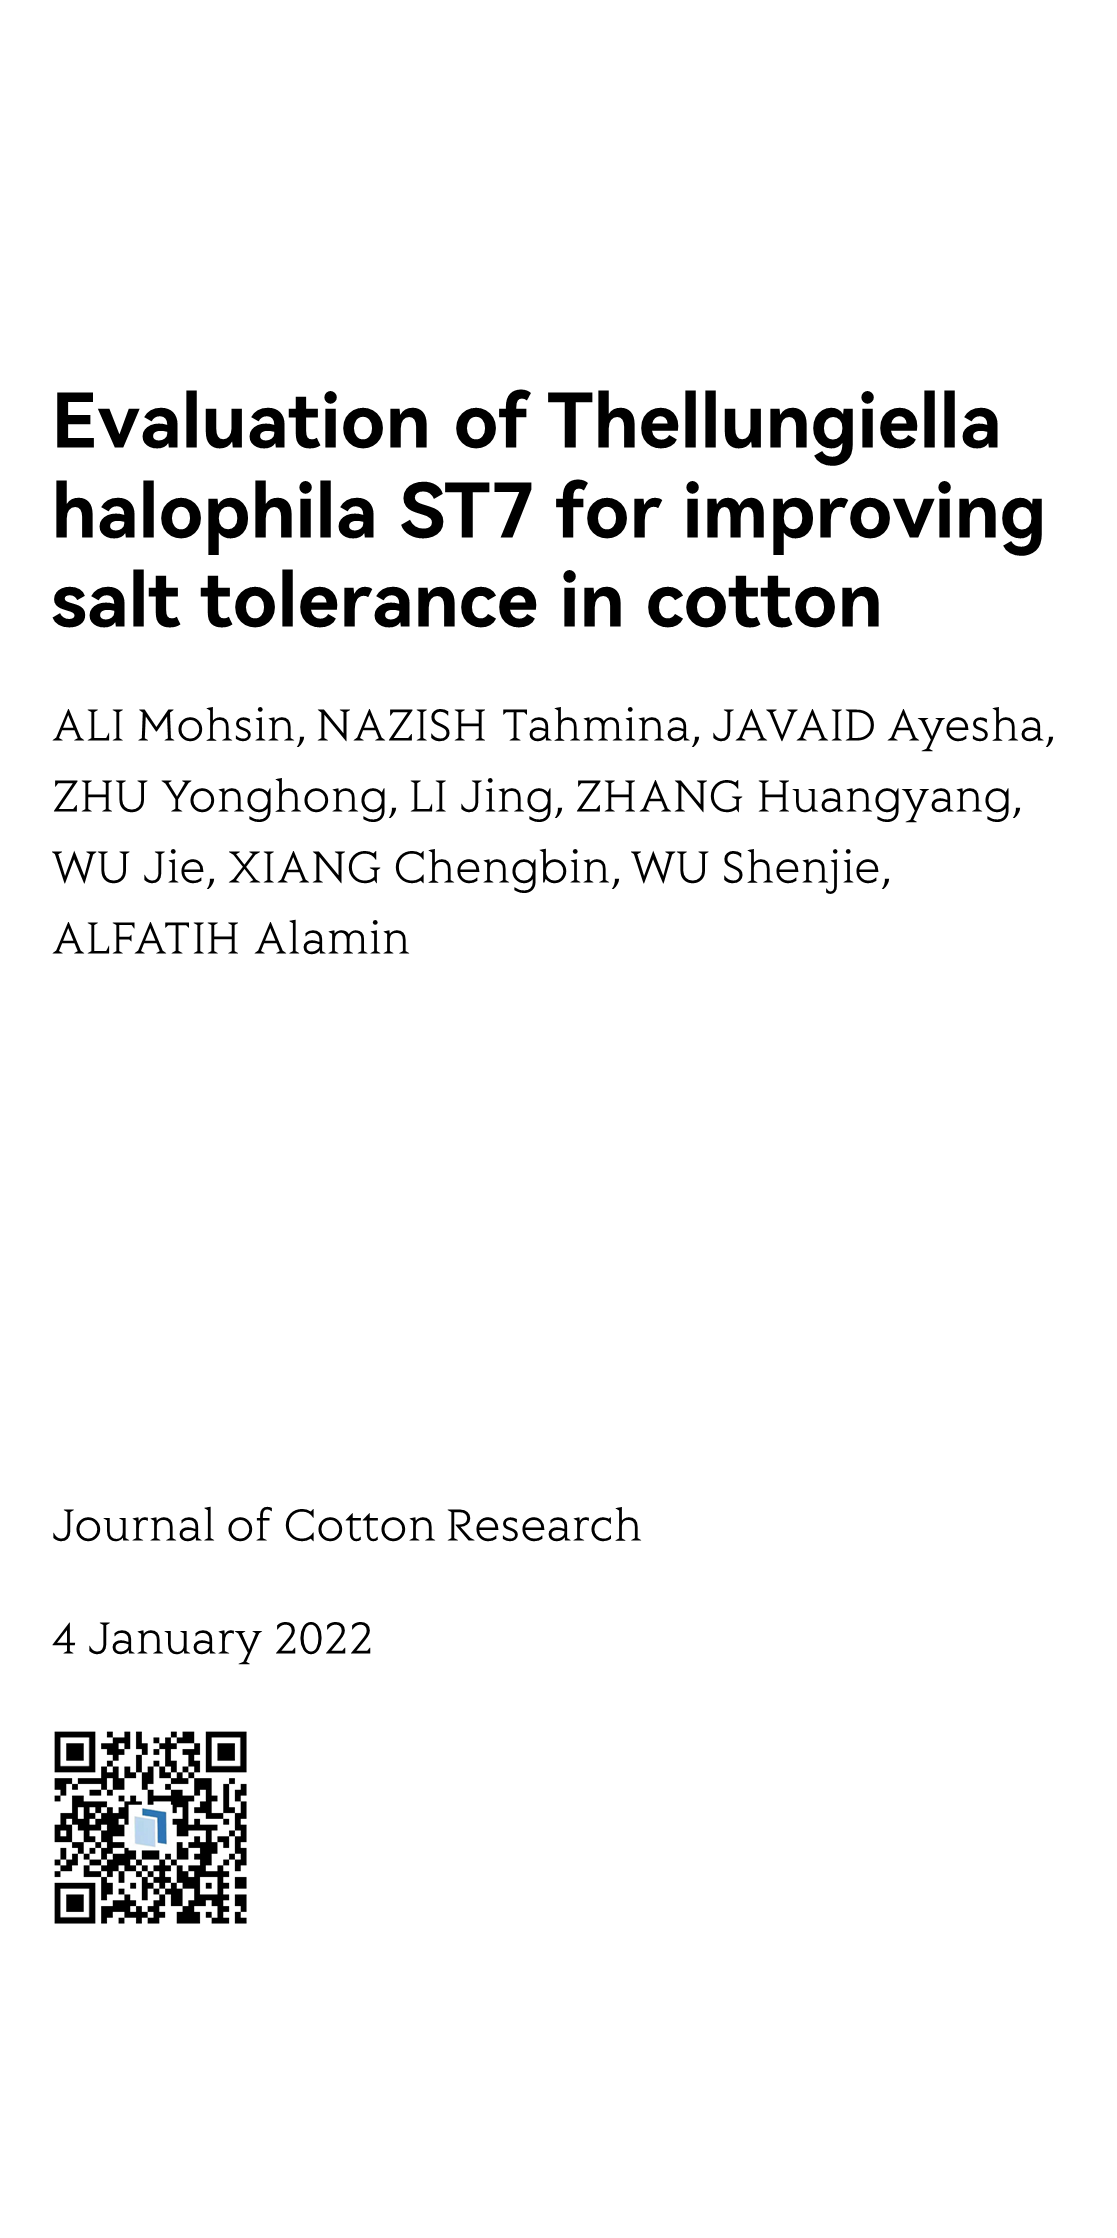 Journal of Cotton Research_1